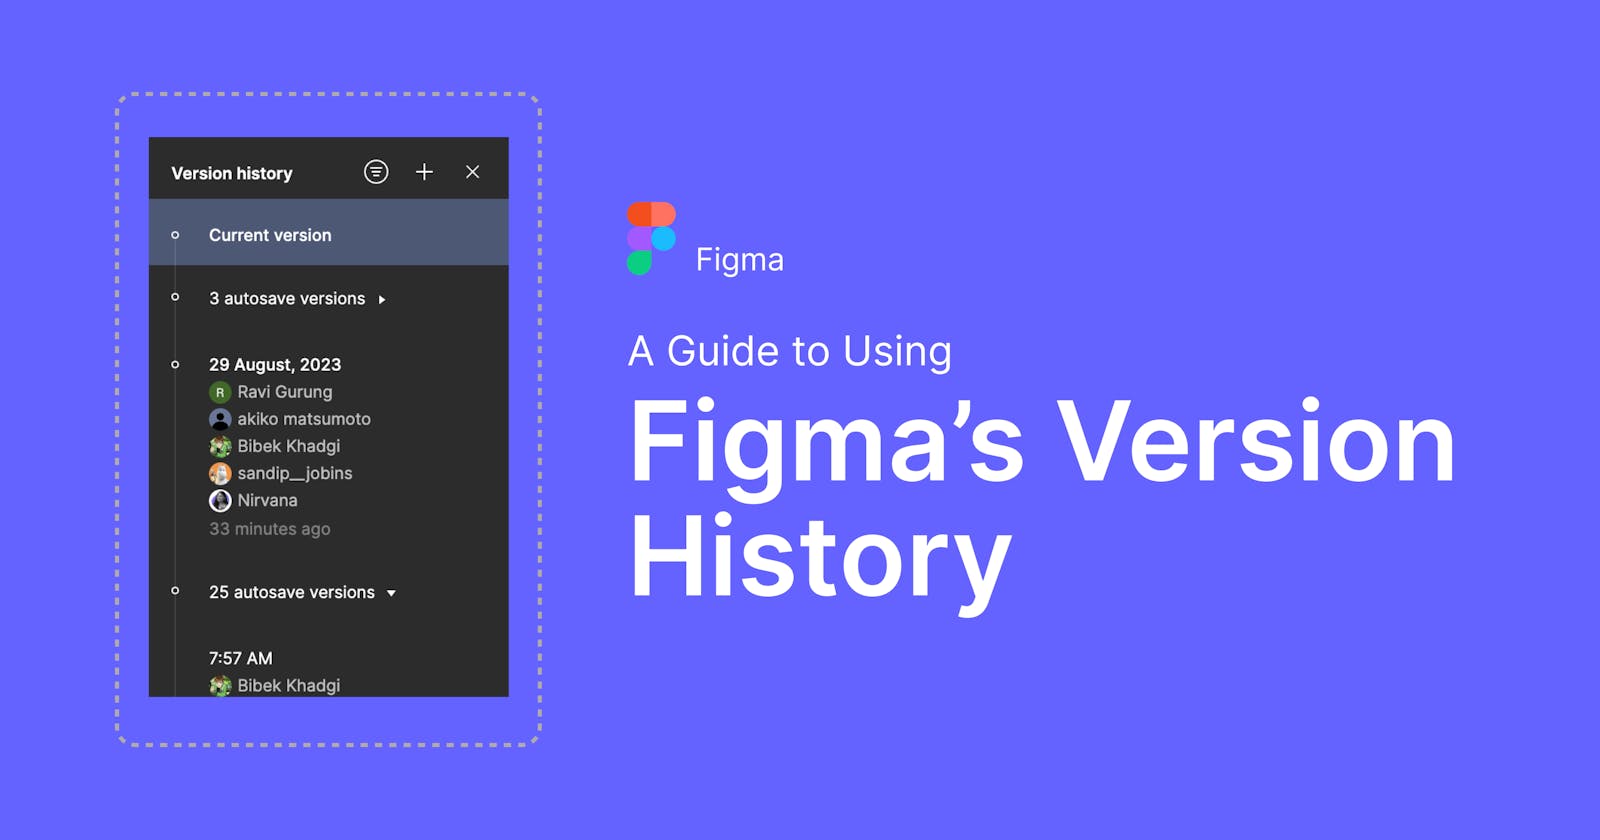 A Guide to Using Figma's Version History